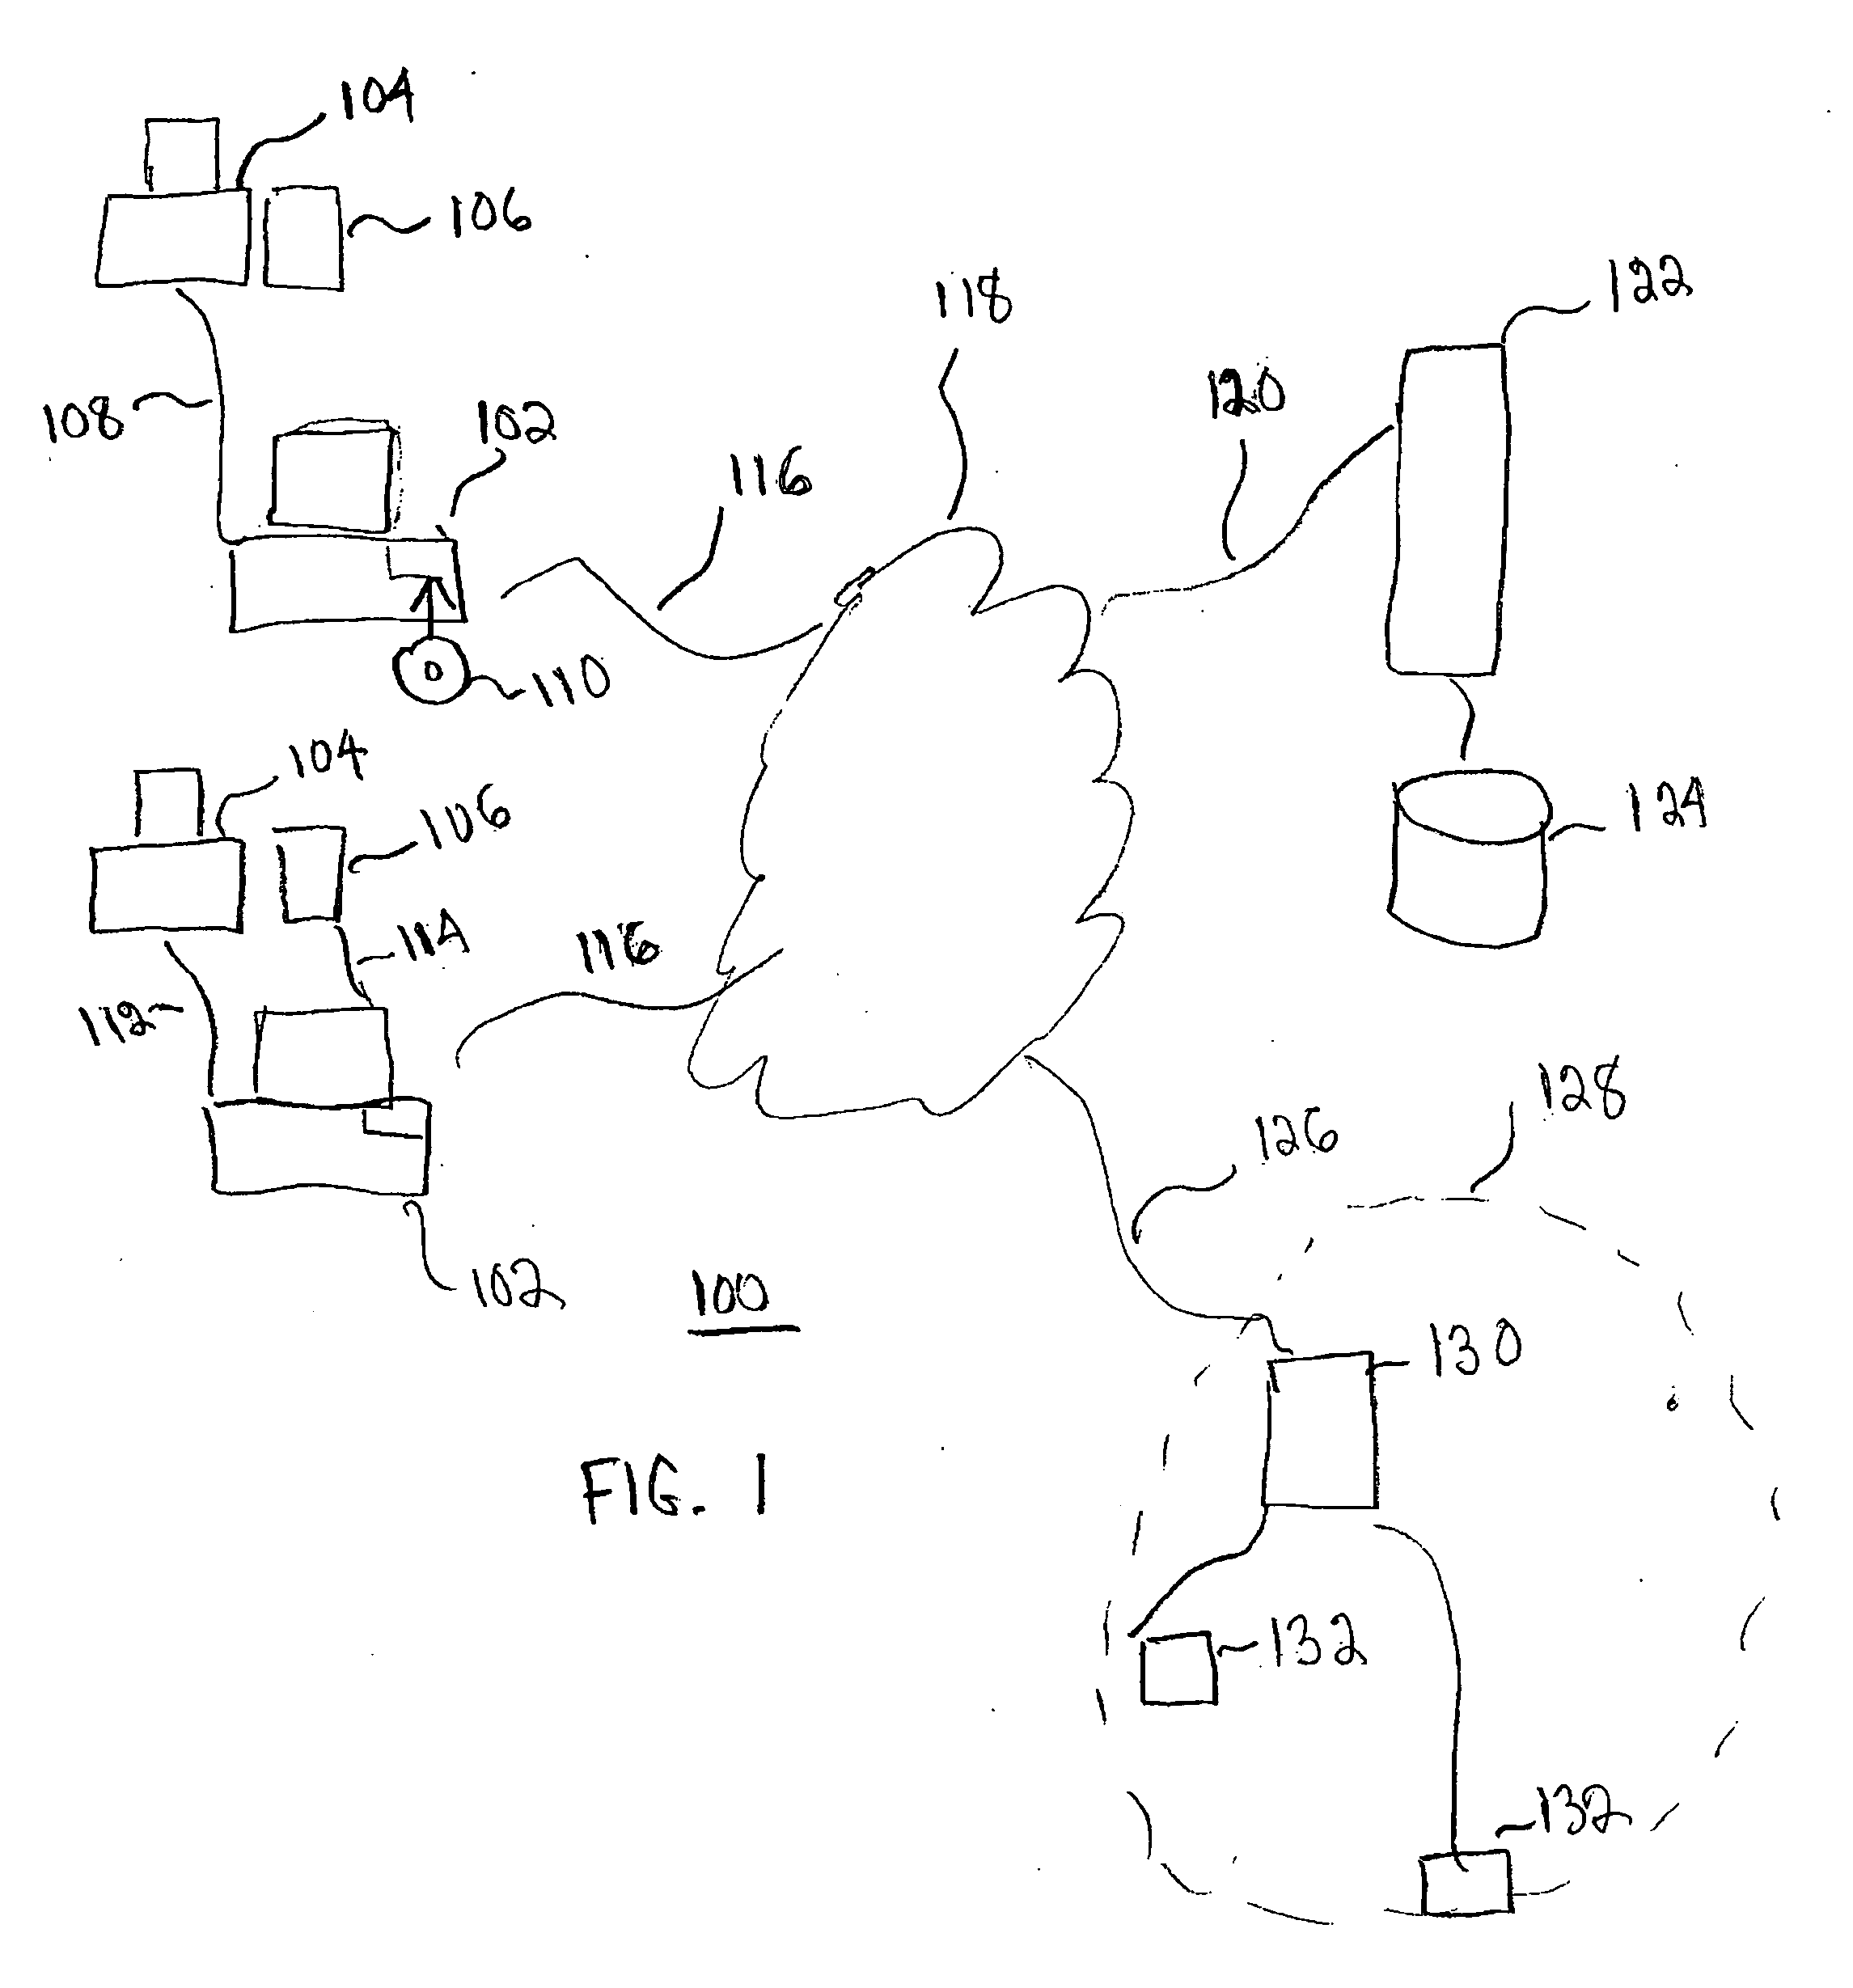 Method and system for creating receipt on paper with embedded RFID tags therein